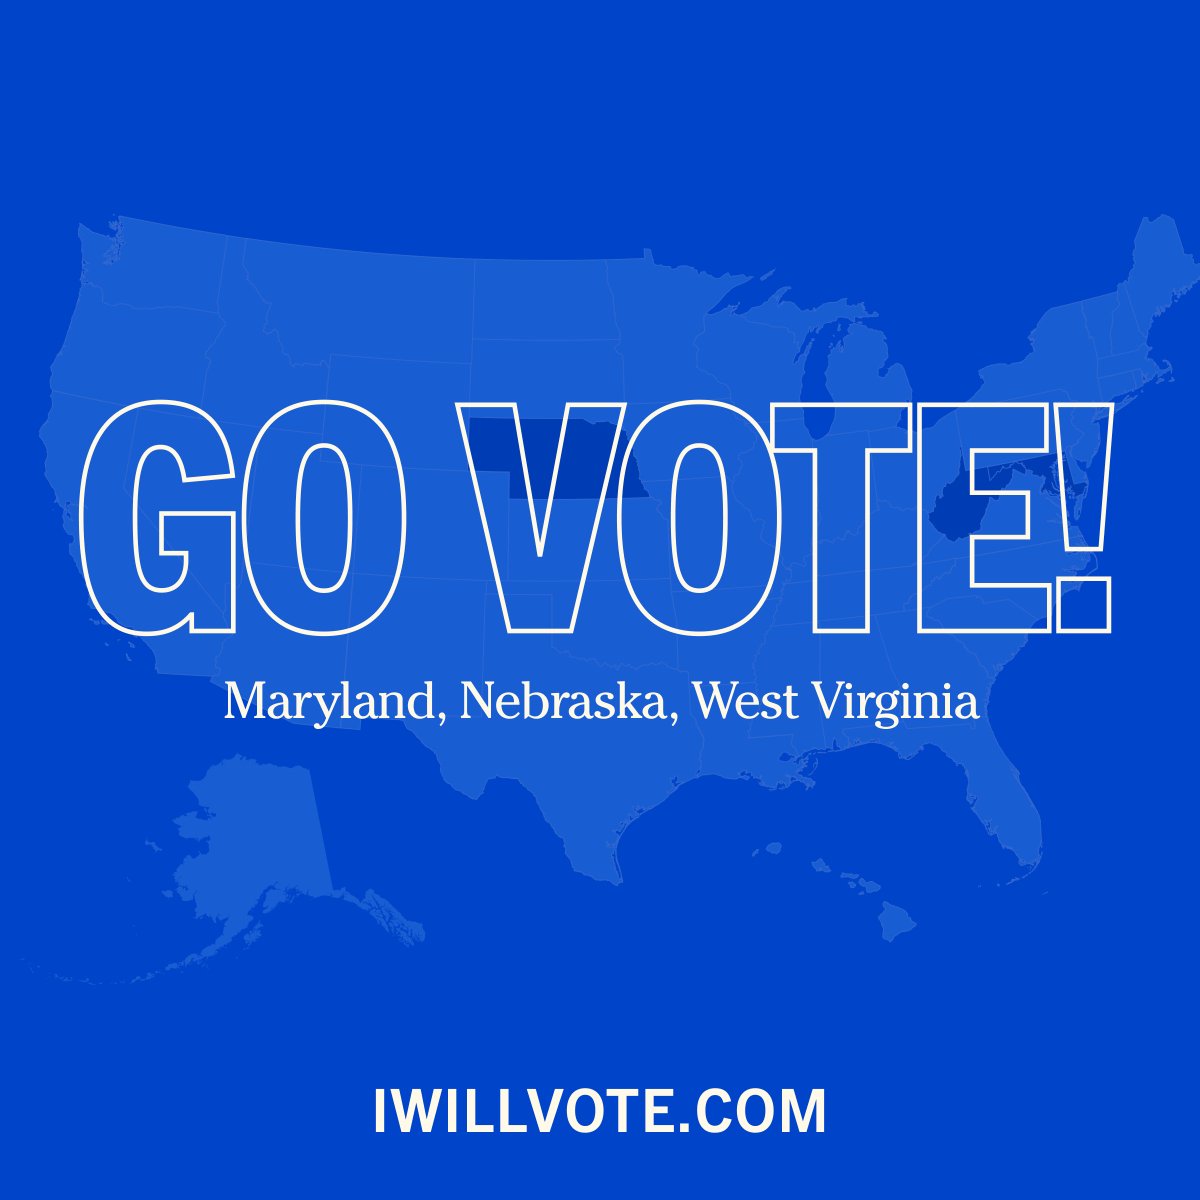 If you live in: 🗳️Maryland 🗳️Nebraska 🗳️West Virginia Today is your presidential primary! Visit IWillVote.com to find your polling location.